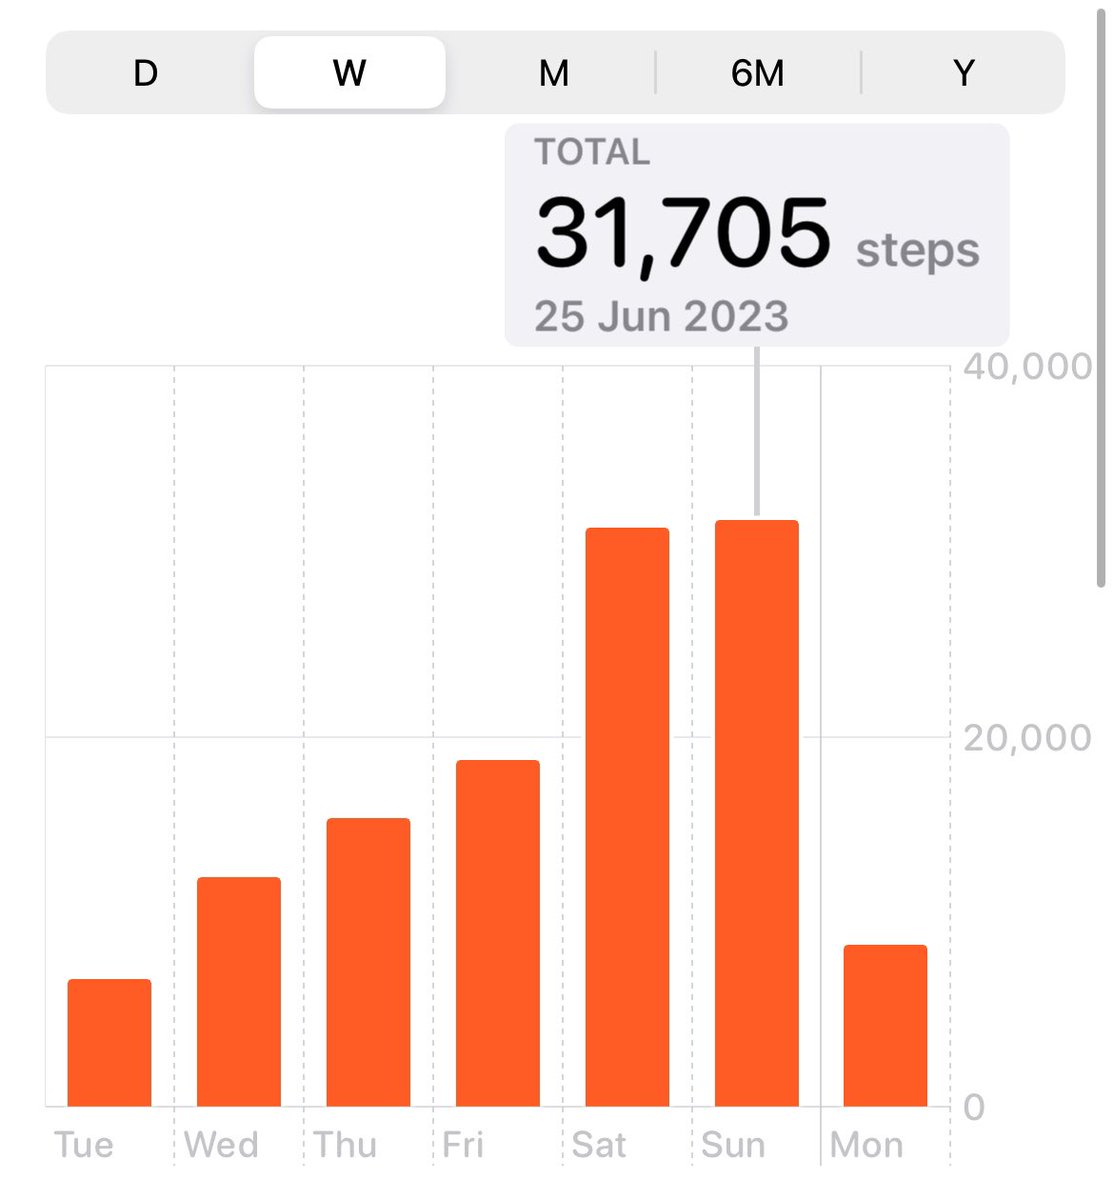 So how are your Glastonbury 2023 step counts looking? Who can beat 31,705 in a day? KS